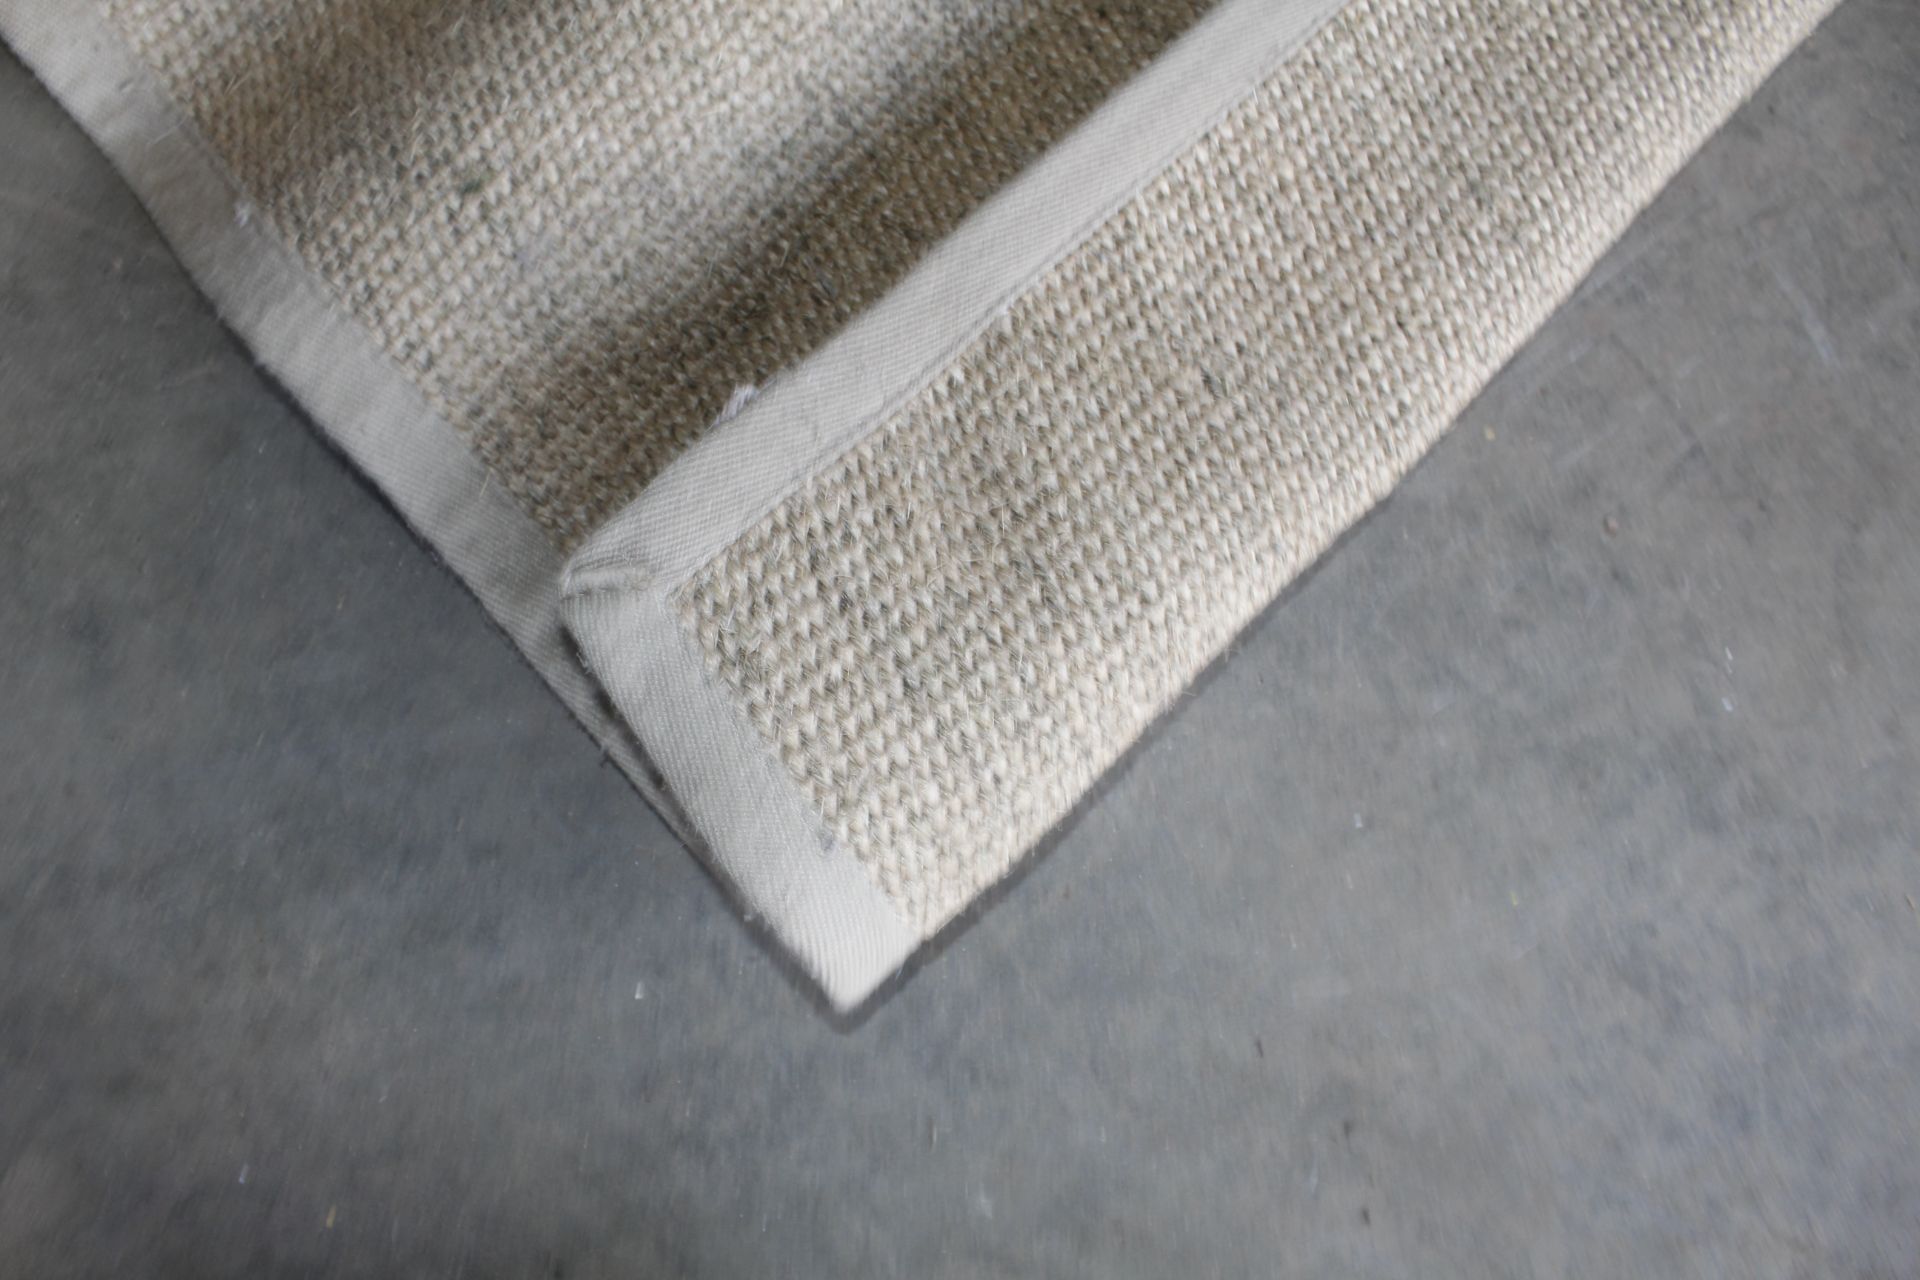 A hessian rug approx. 7'4" x 5'3" - Image 3 of 3